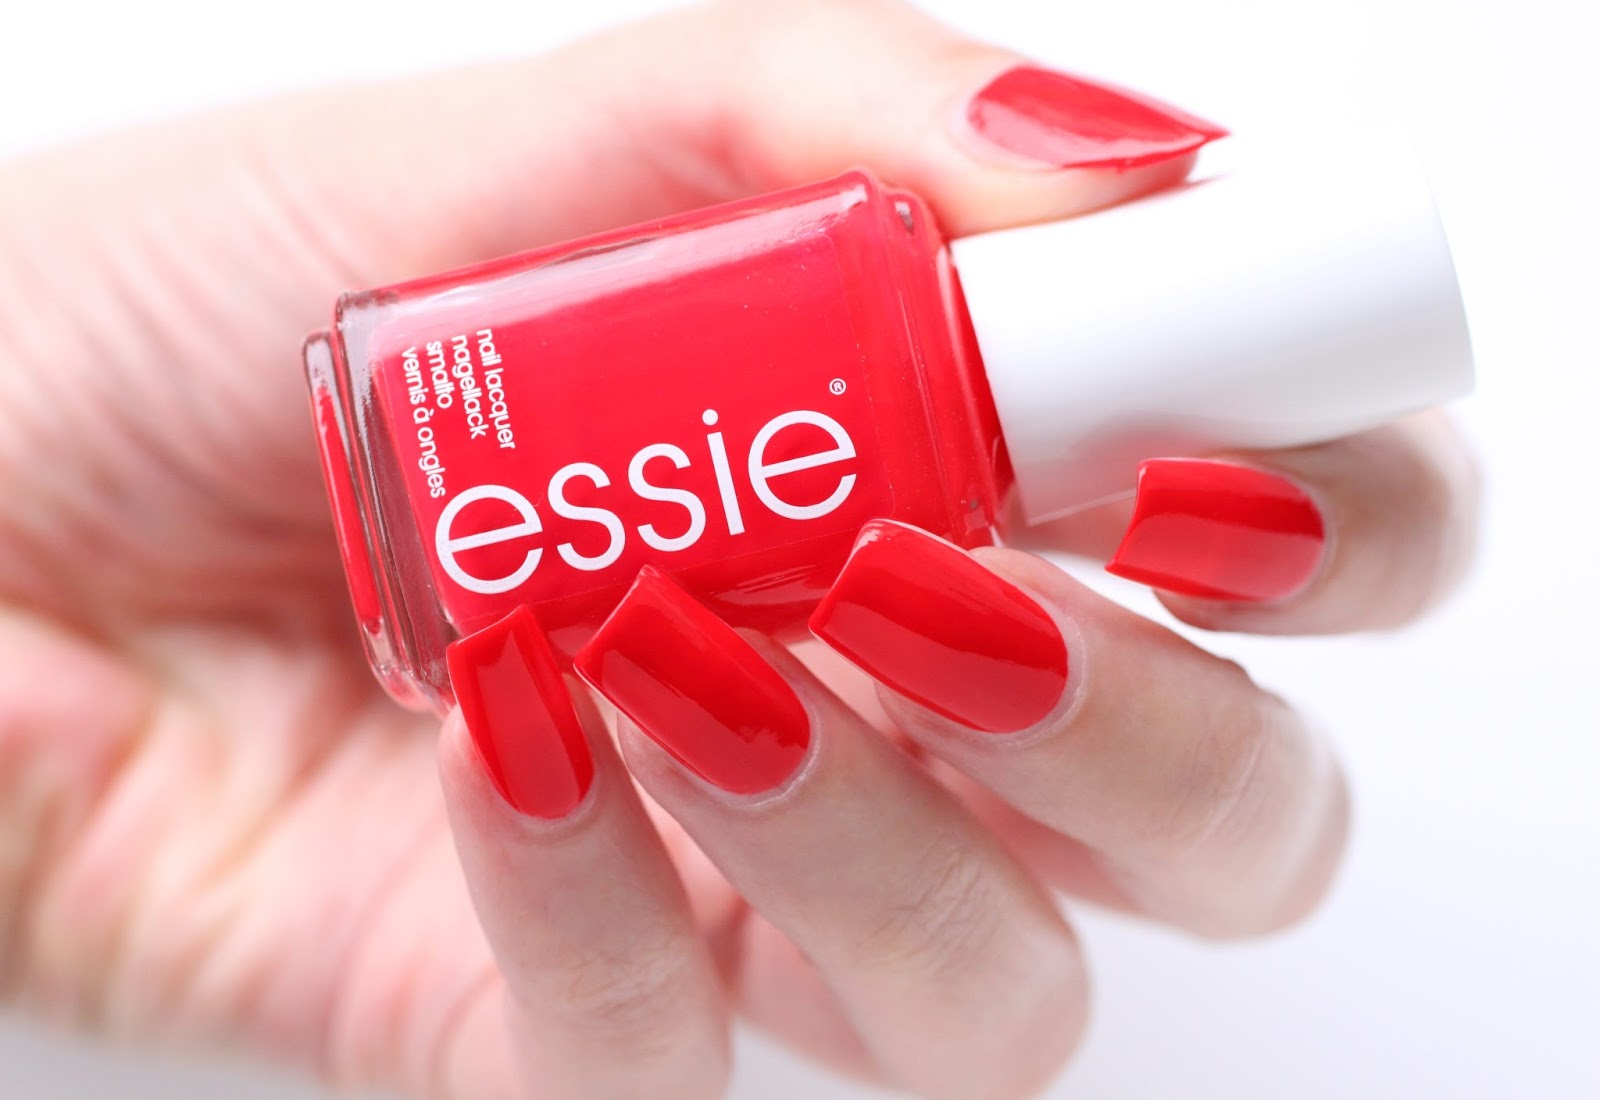 Essie Nail Polish Palette And Composition Of Gel Polish Professional Series Reviews